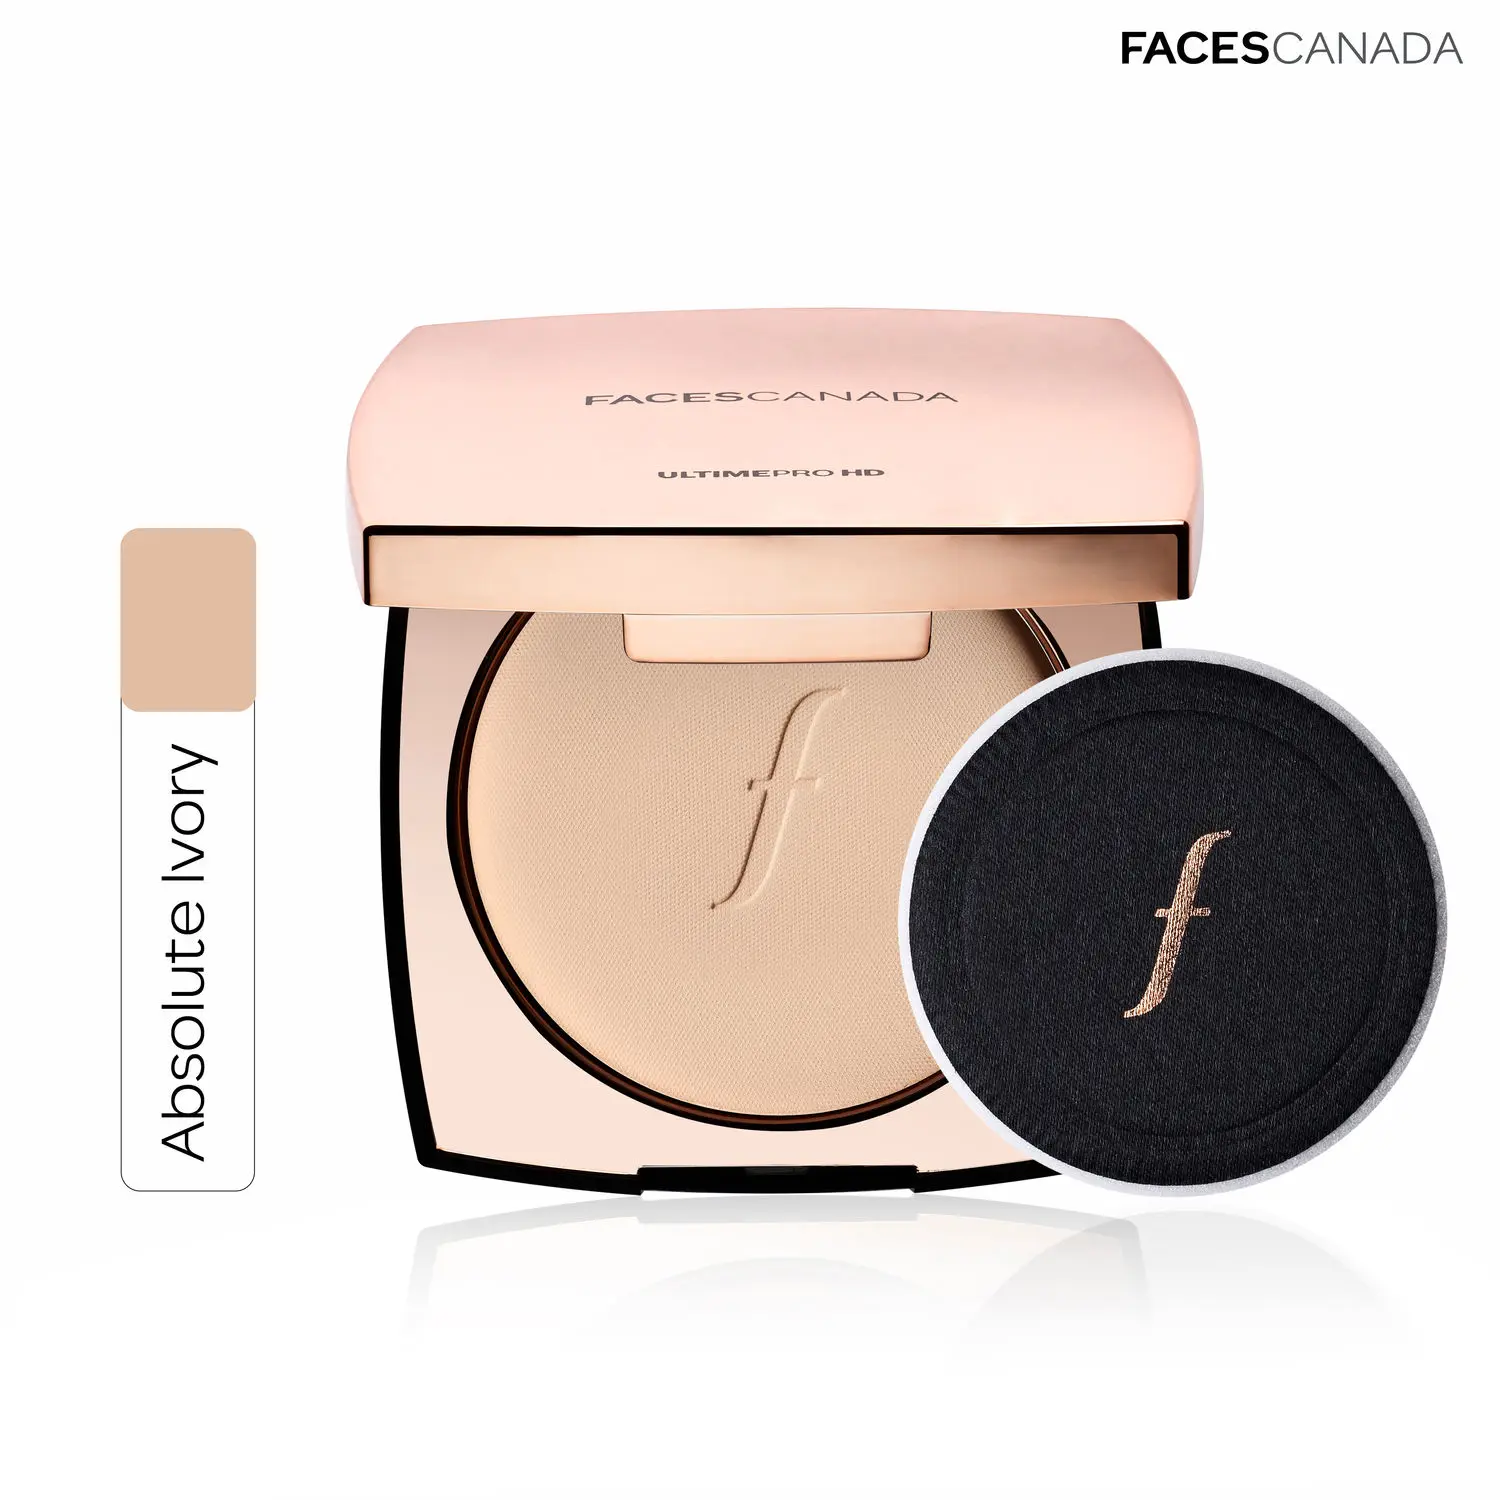 Faces Canada Ultime Pro HD Matte Brilliance Pressed Powder - Absolute Ivory 01 (8 g)